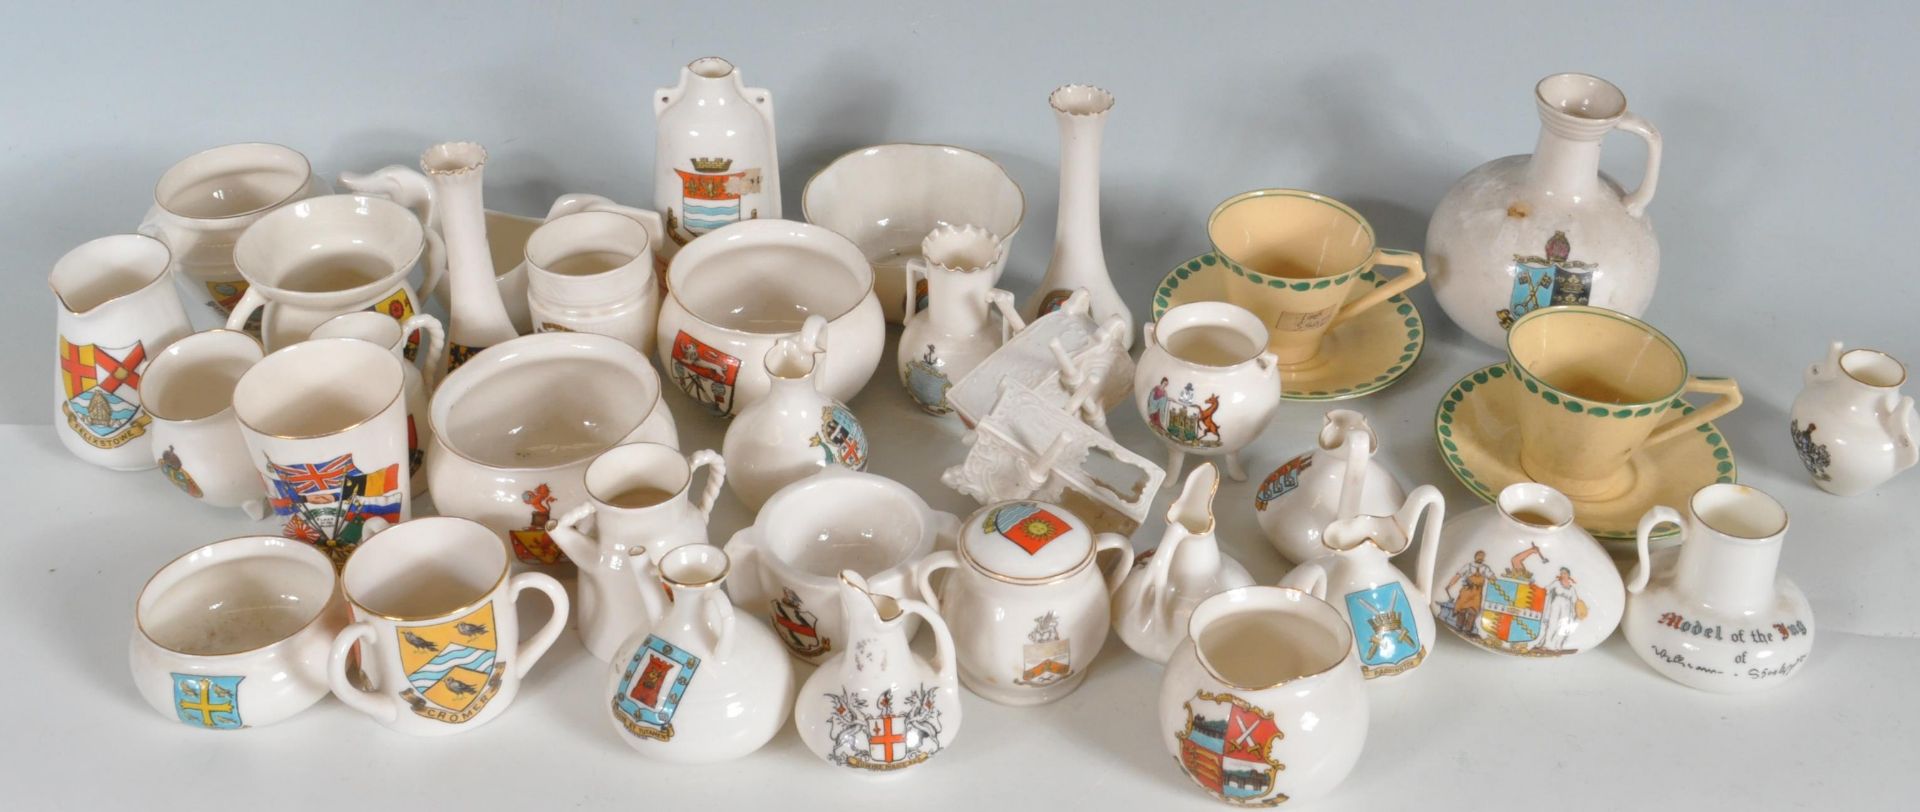 LARGE COLLECTION OF GOSS CERAMC WARE